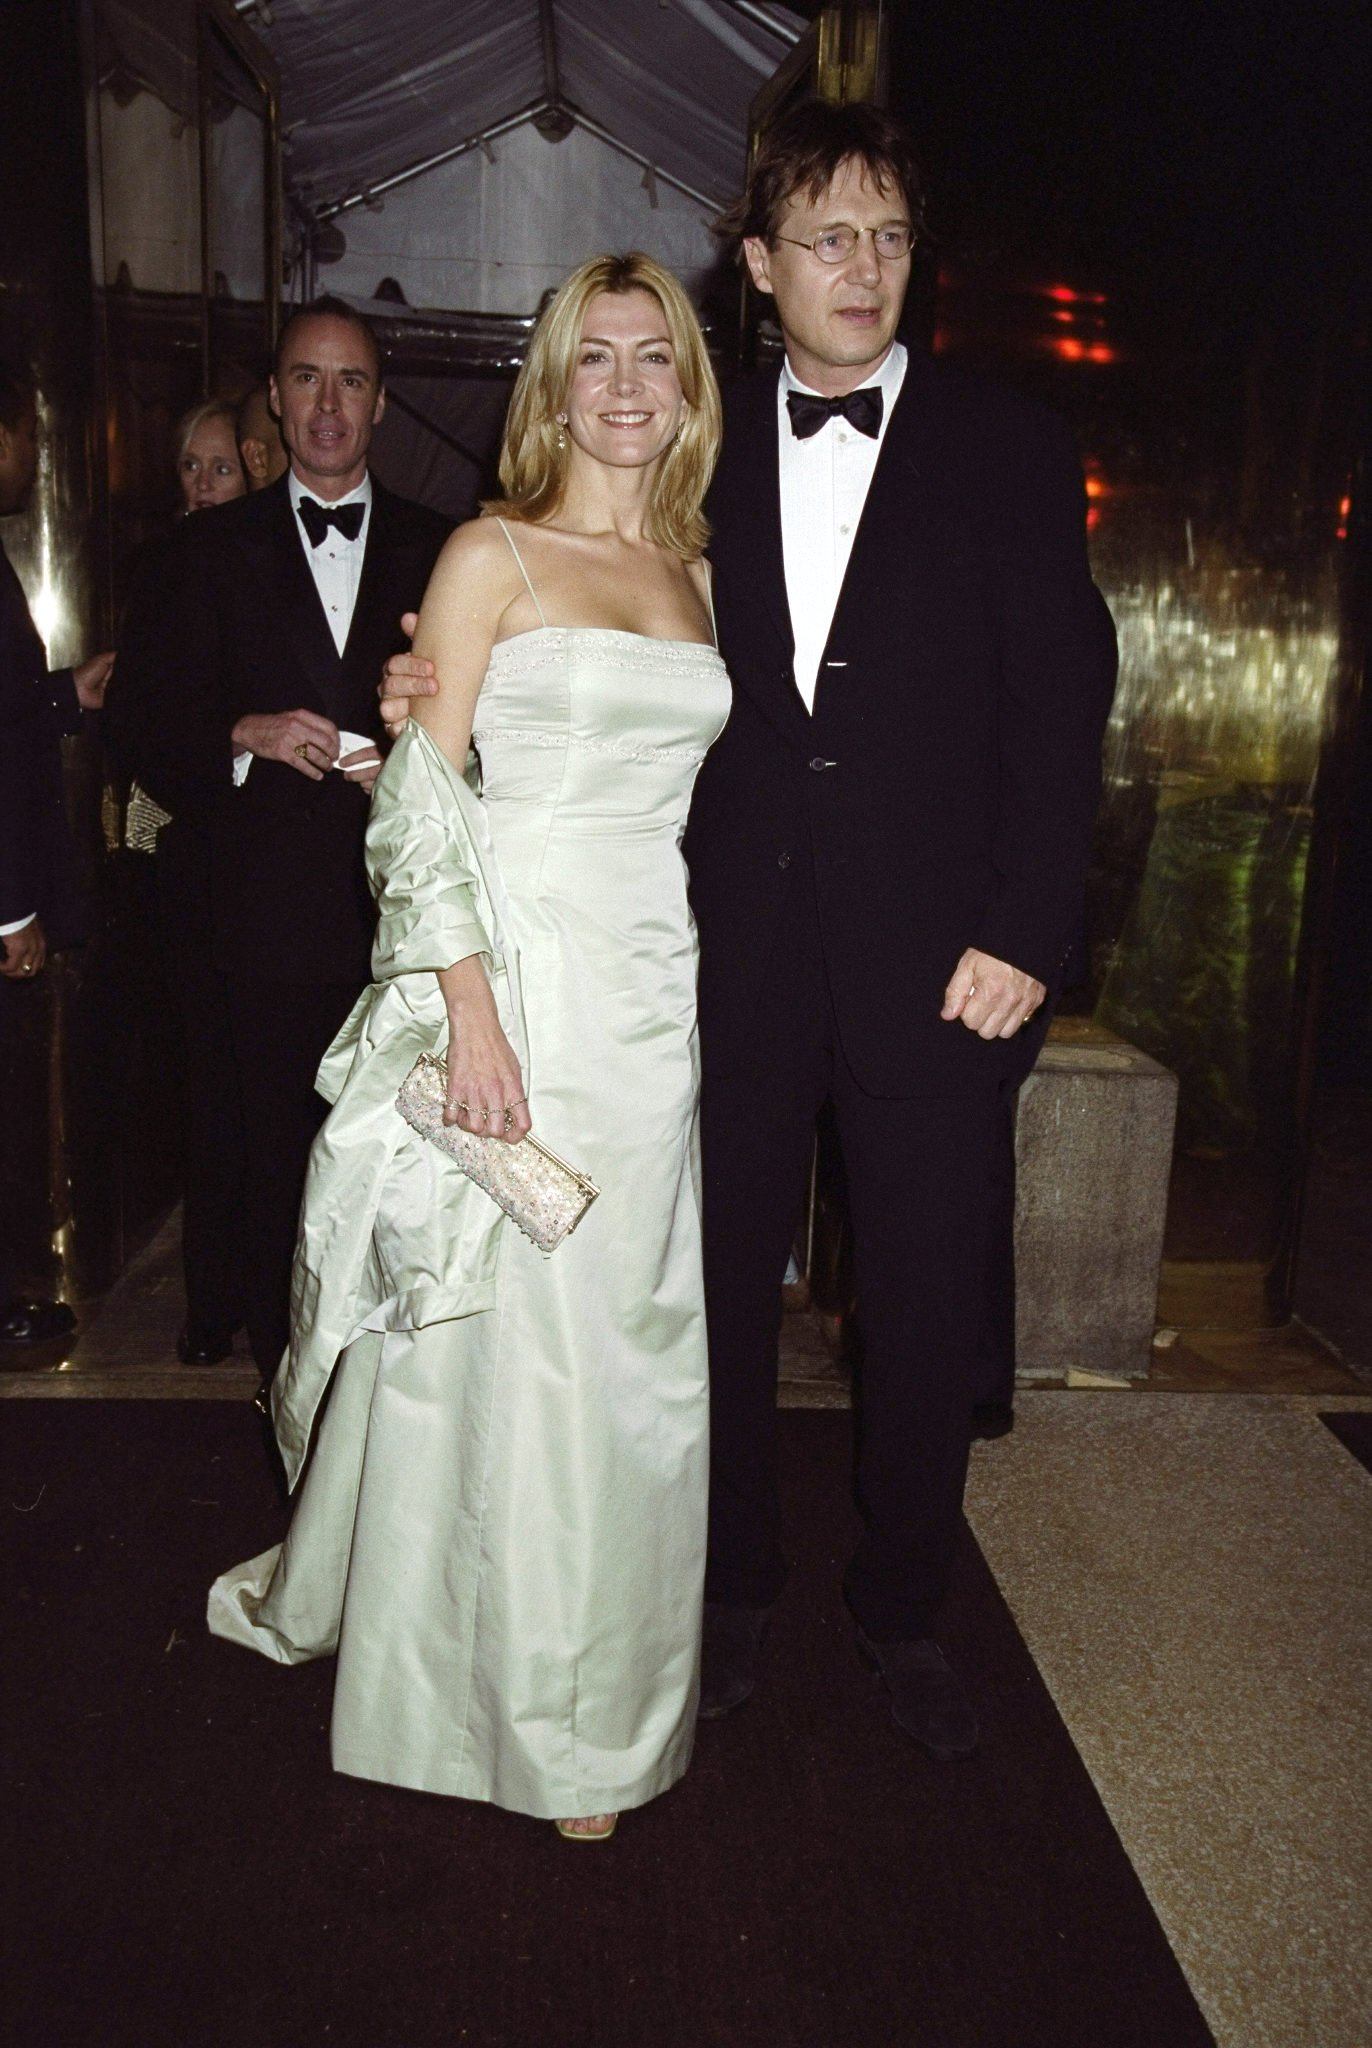 Natasha Richardson and Liam Neeson arrive at the Costume Institute Gala "Rock Style," an exhibit of rock 'n' roll fashions at the Metropolitan Museum of Art. | Source: Getty Images